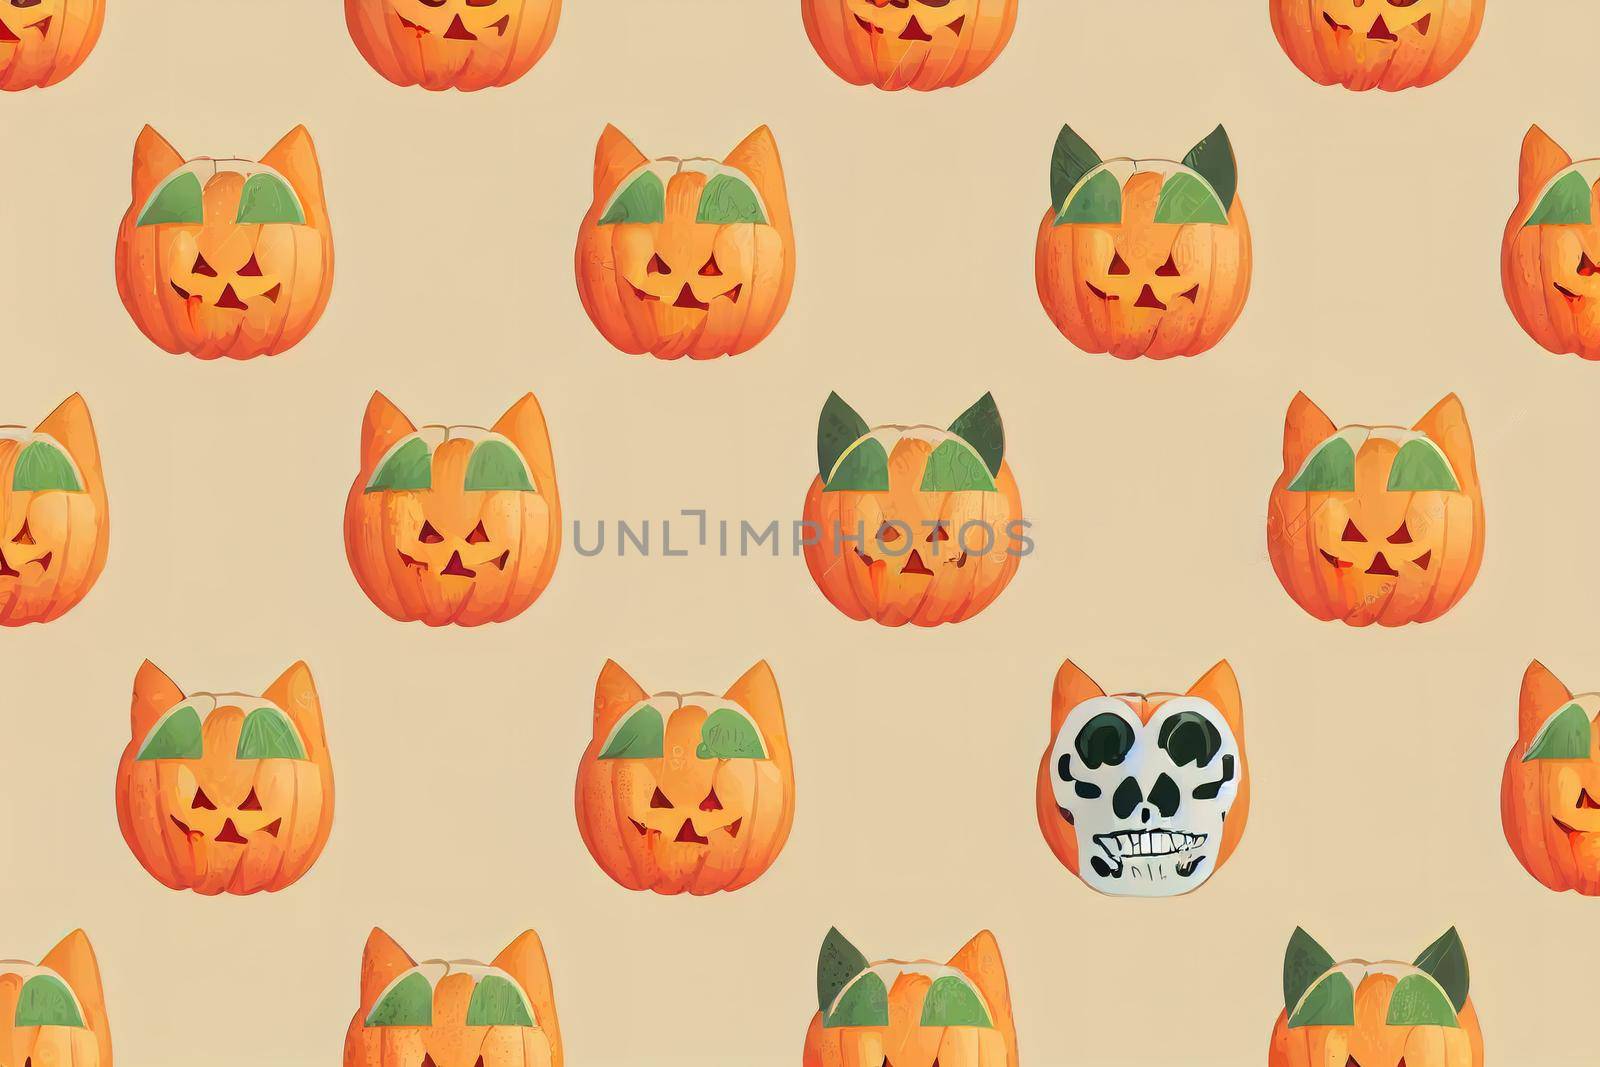 Cute seamless pattern of Halloween cat,pumpkin,skull,heart shapes on green,happy Halloween concept illustration,design for texture,fabric,clothing,decoration,wrapping,print,cartoon character v1